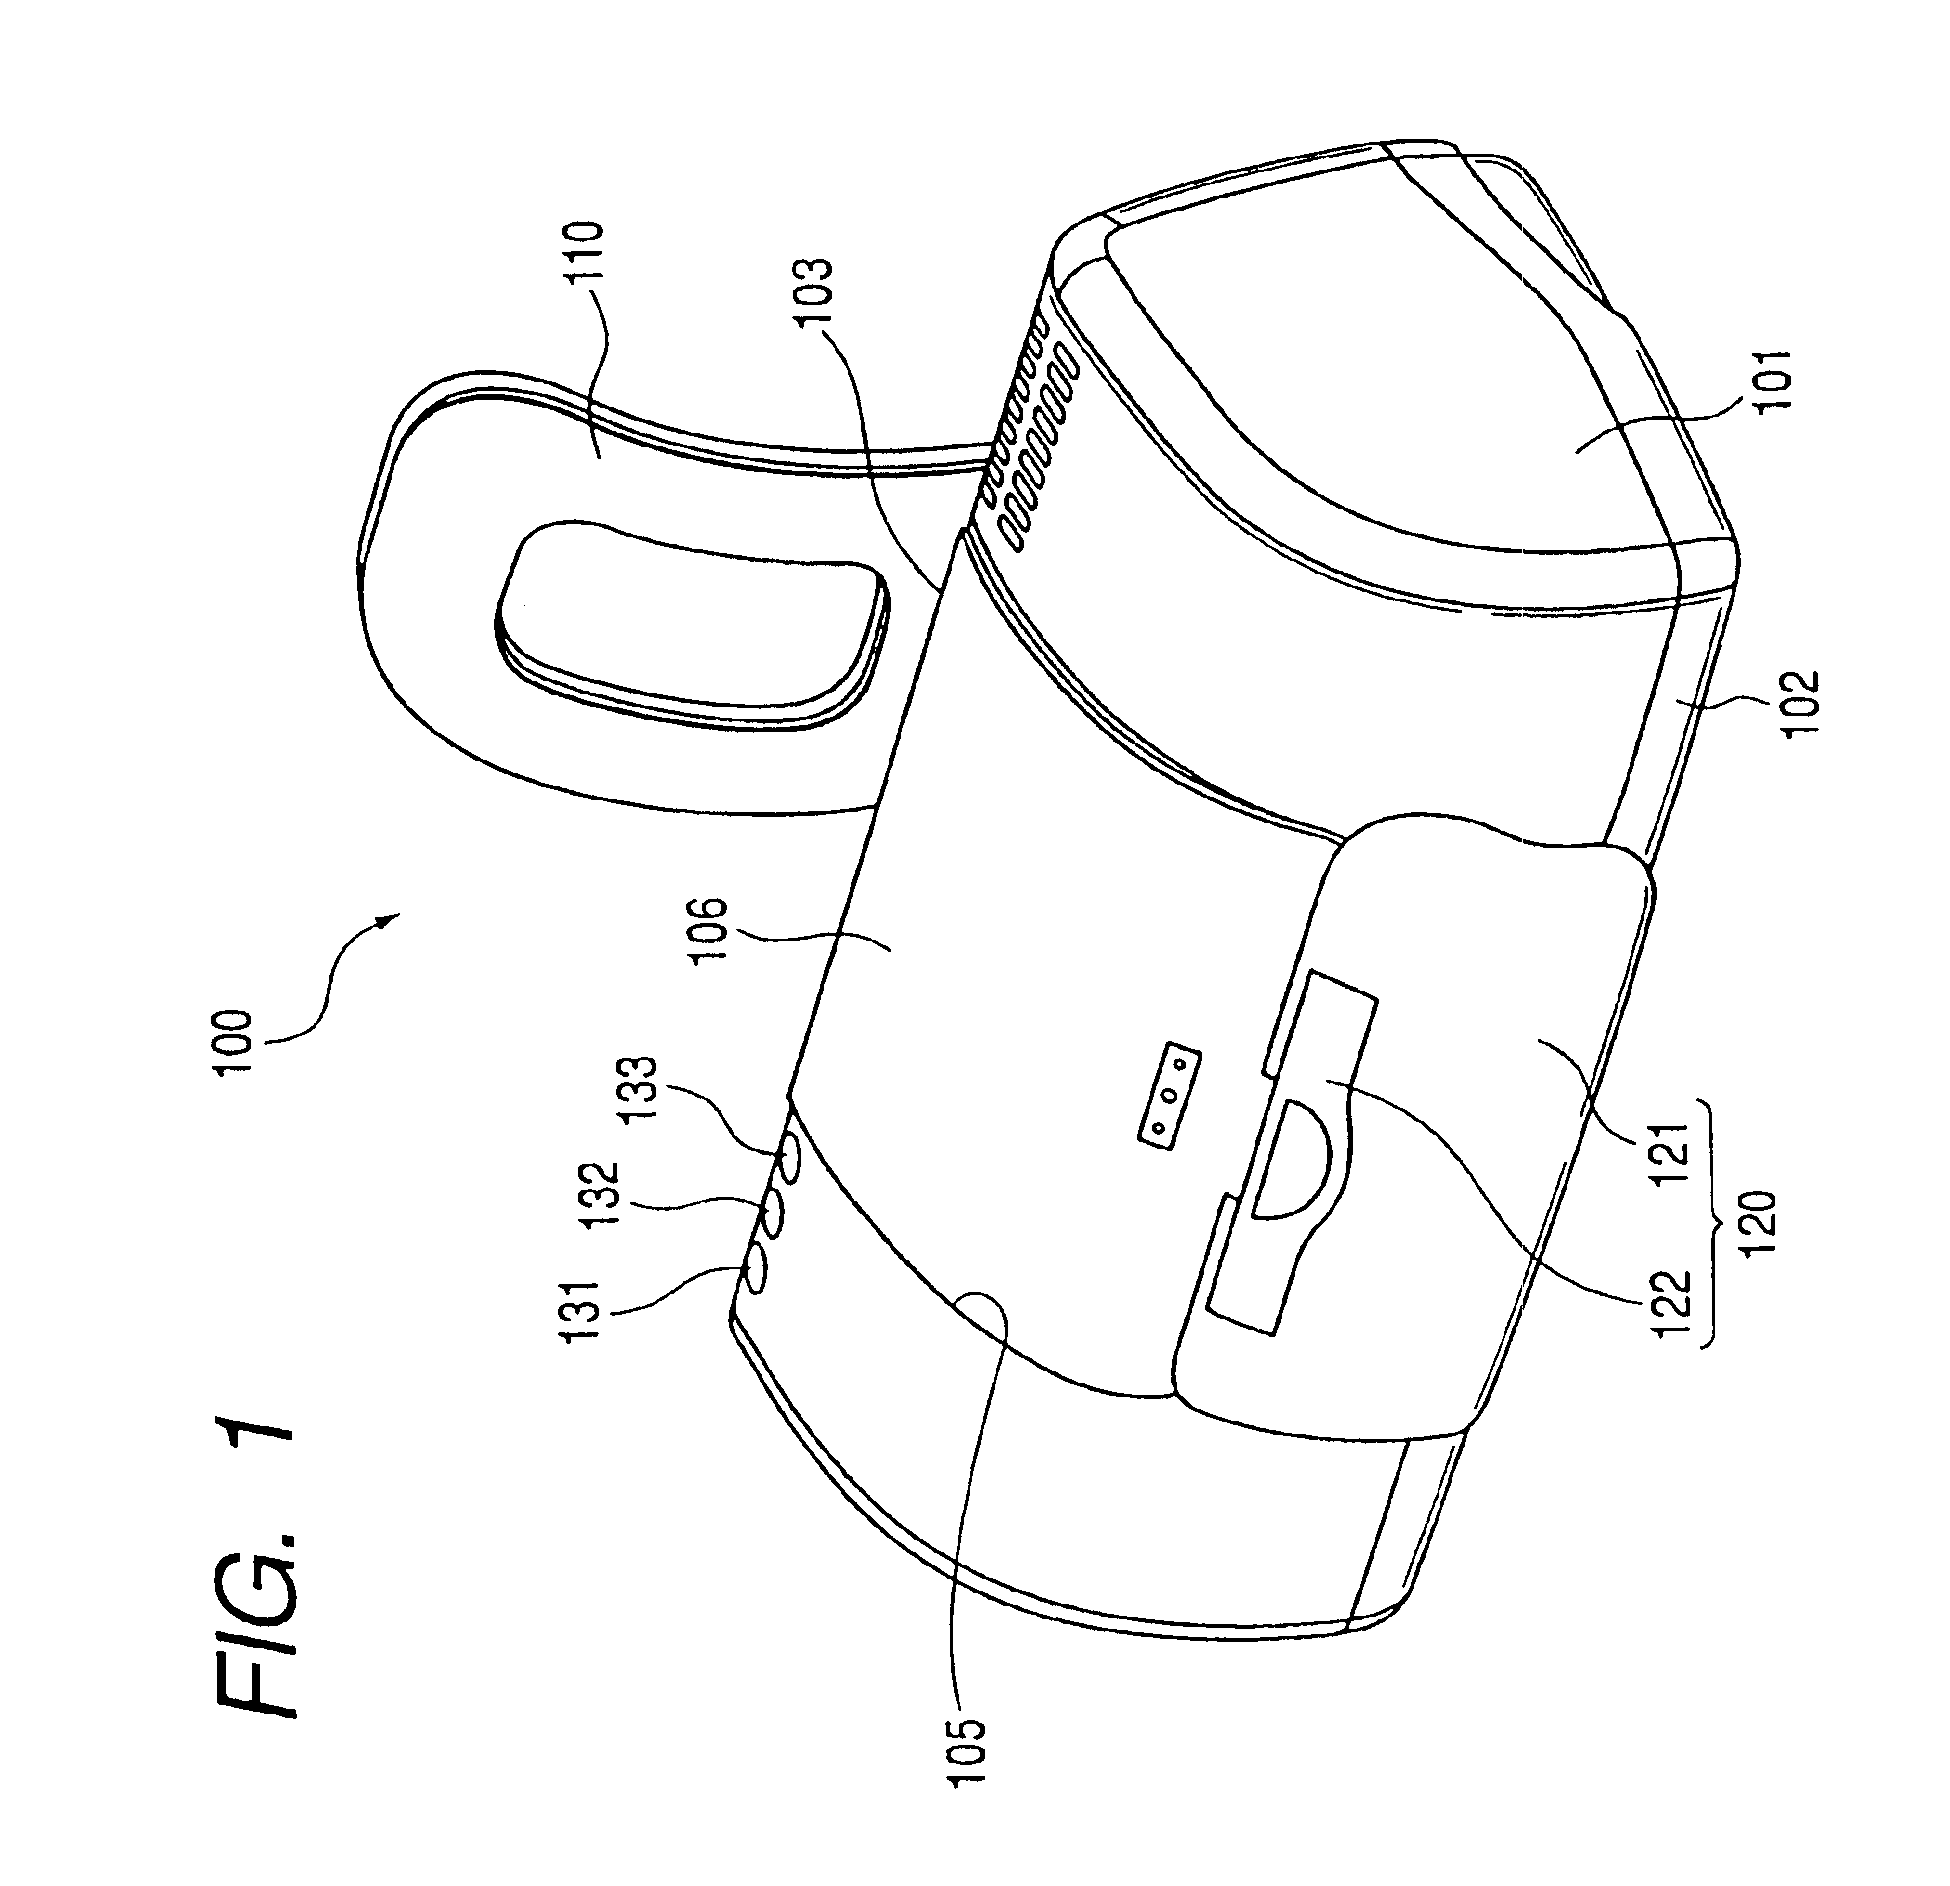 Discharging roller, method of manufacturing the same, and recording apparatus incorporating the same